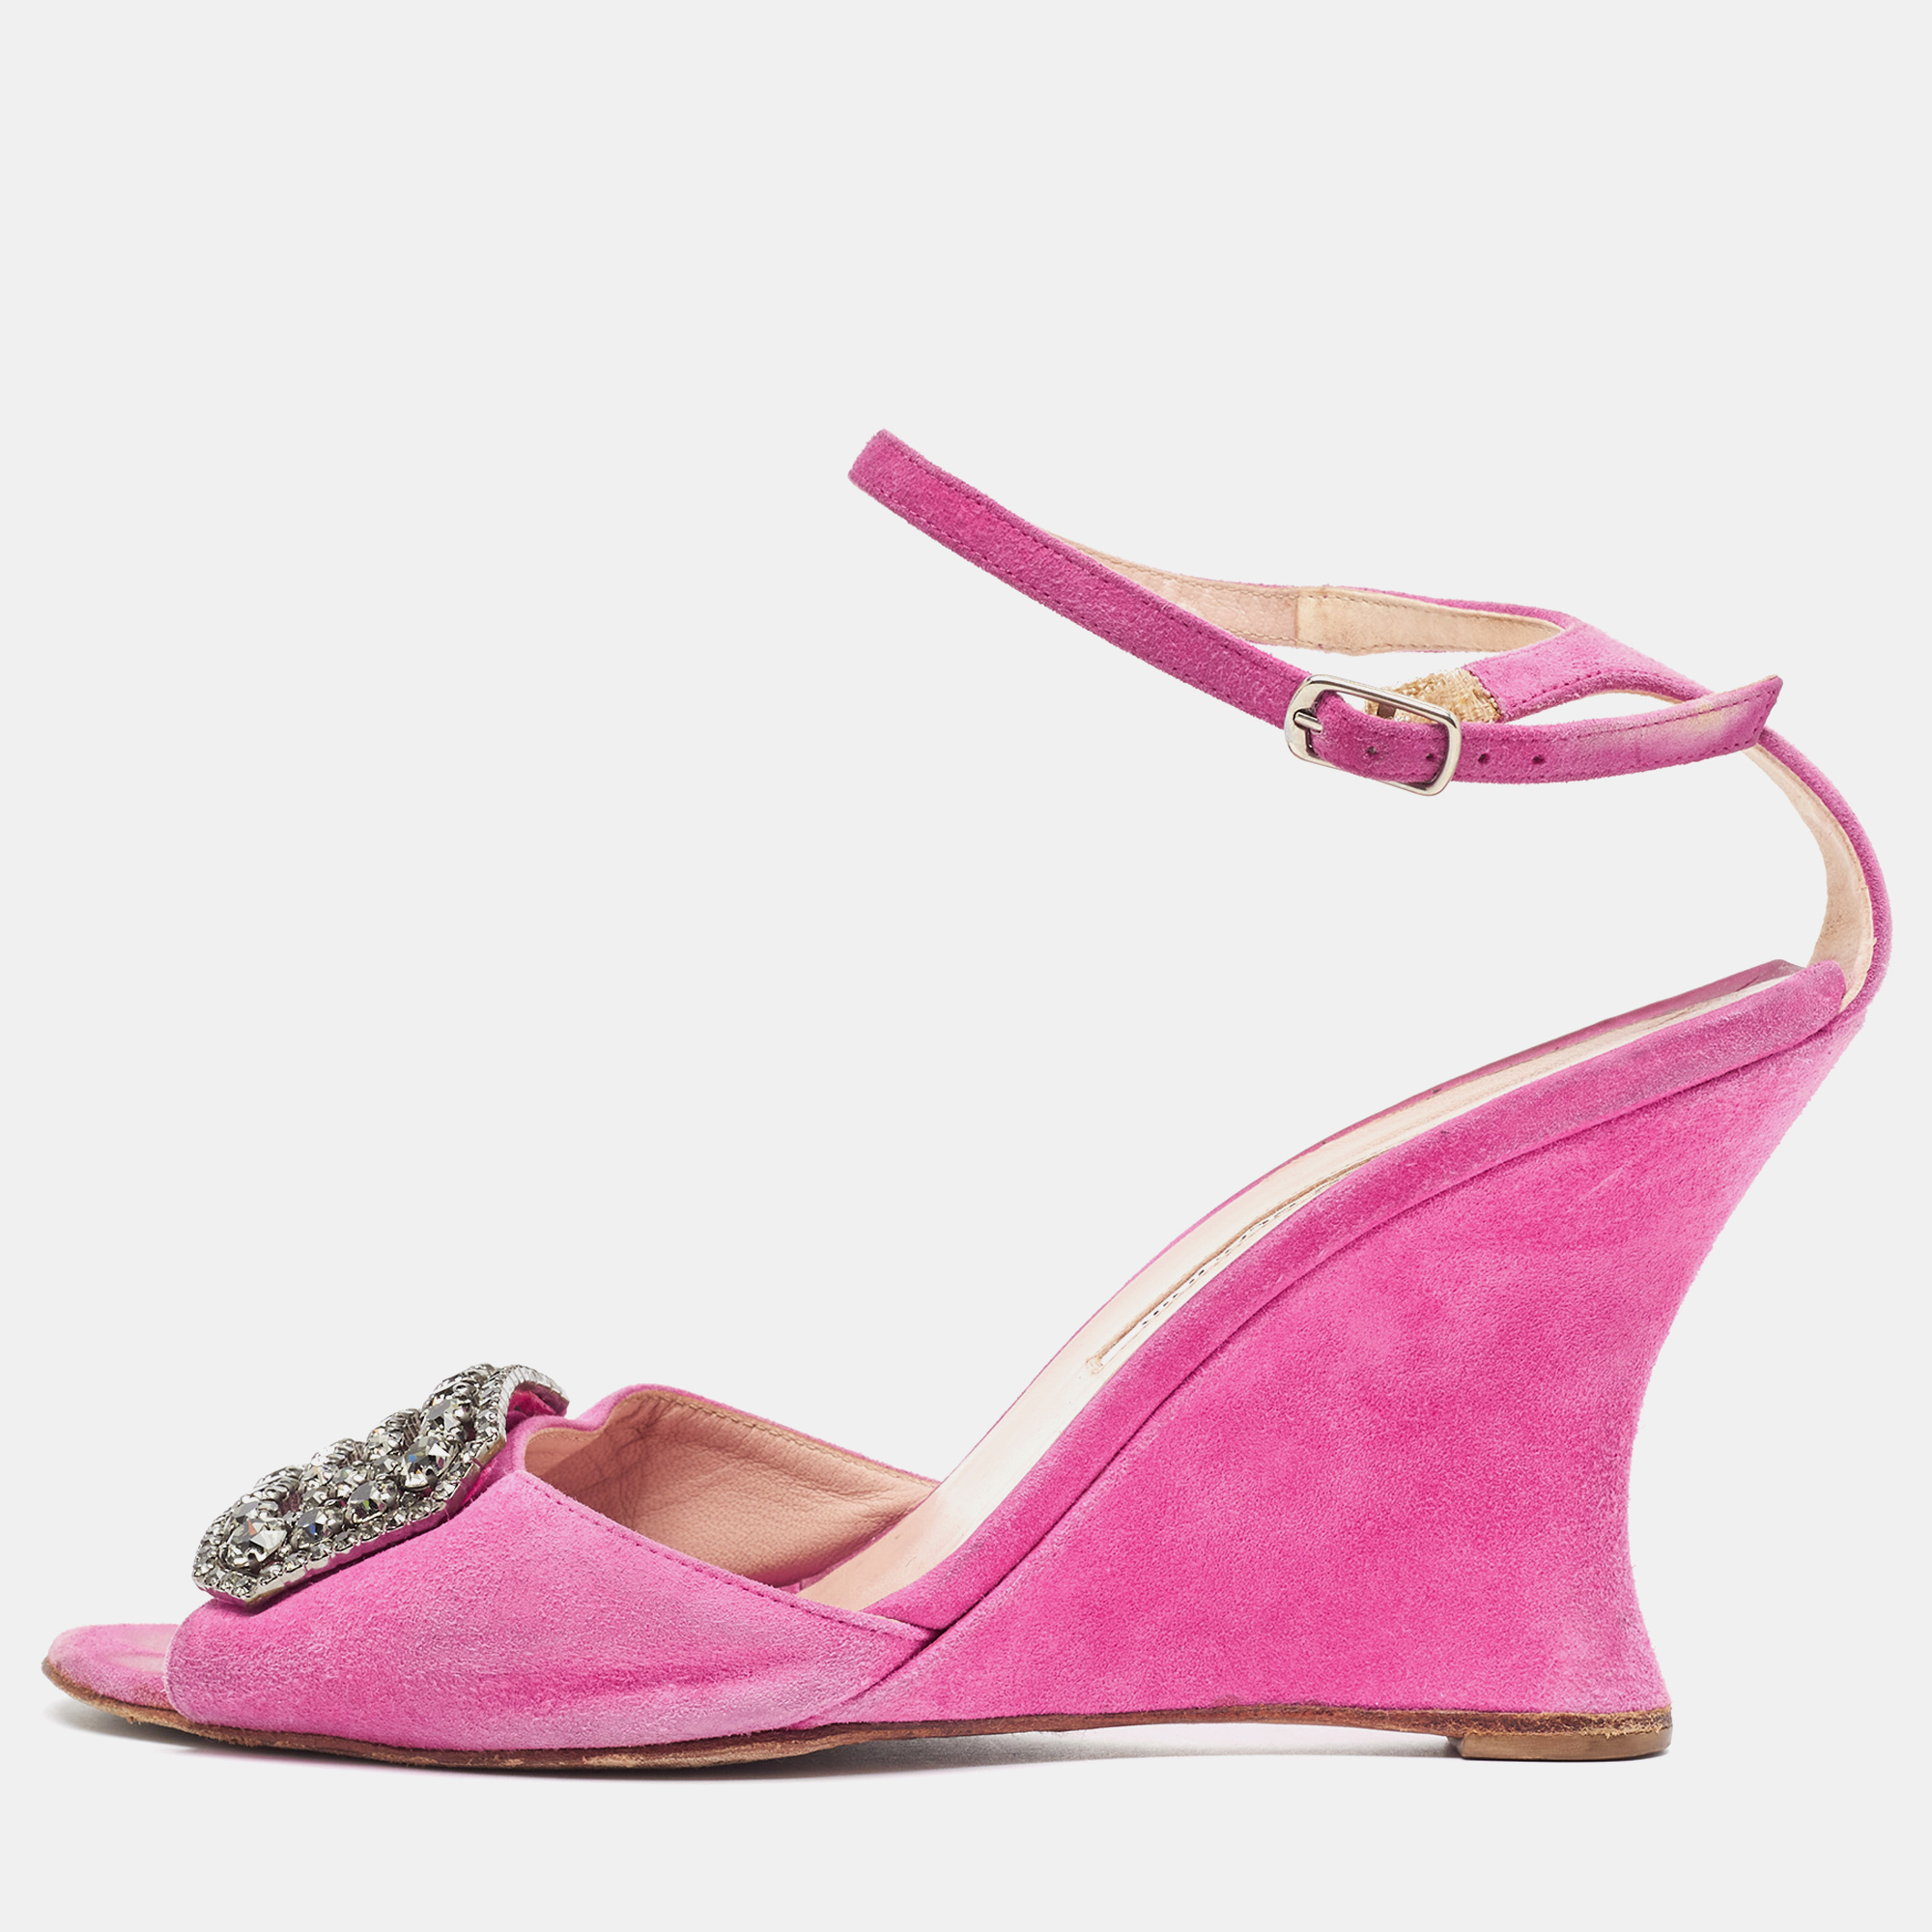 Manolo blahnik fuchsia suede crystal embellished trice wedge sandals size 38.5